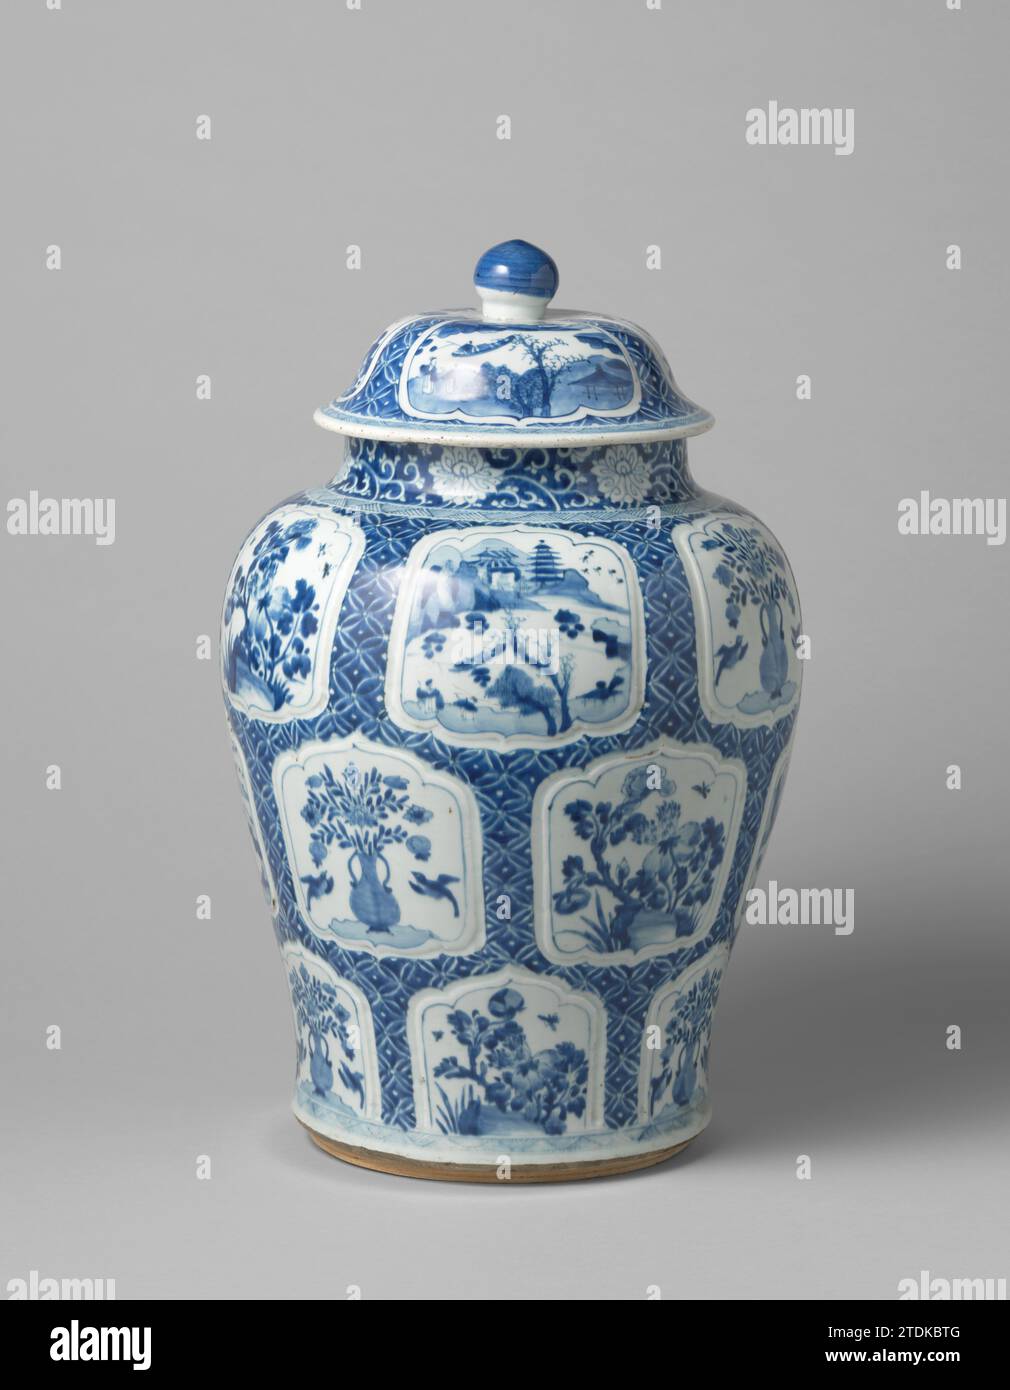 Baluster covered jar with flower vases, flowering plants and landscapes in panels, anonymous, c. 1680 - c. 1720 Balus -shaped porcelain lid jar, painted in underlaze blue. The belly is covered with servetwork with modeled modeled, scalloped cartouches with a flower vase (lotus) with two birds, flowering plants (peony) in a rock or a river landscap with two person, a boat, pavilions, trees and mountains. The neck with stylized lotus drinks. On the shoulder and around the foot a bond with archery. The lid with the same decoration. Blue White. China porcelain. glaze. cobalt (mineral) painting / v Stock Photo